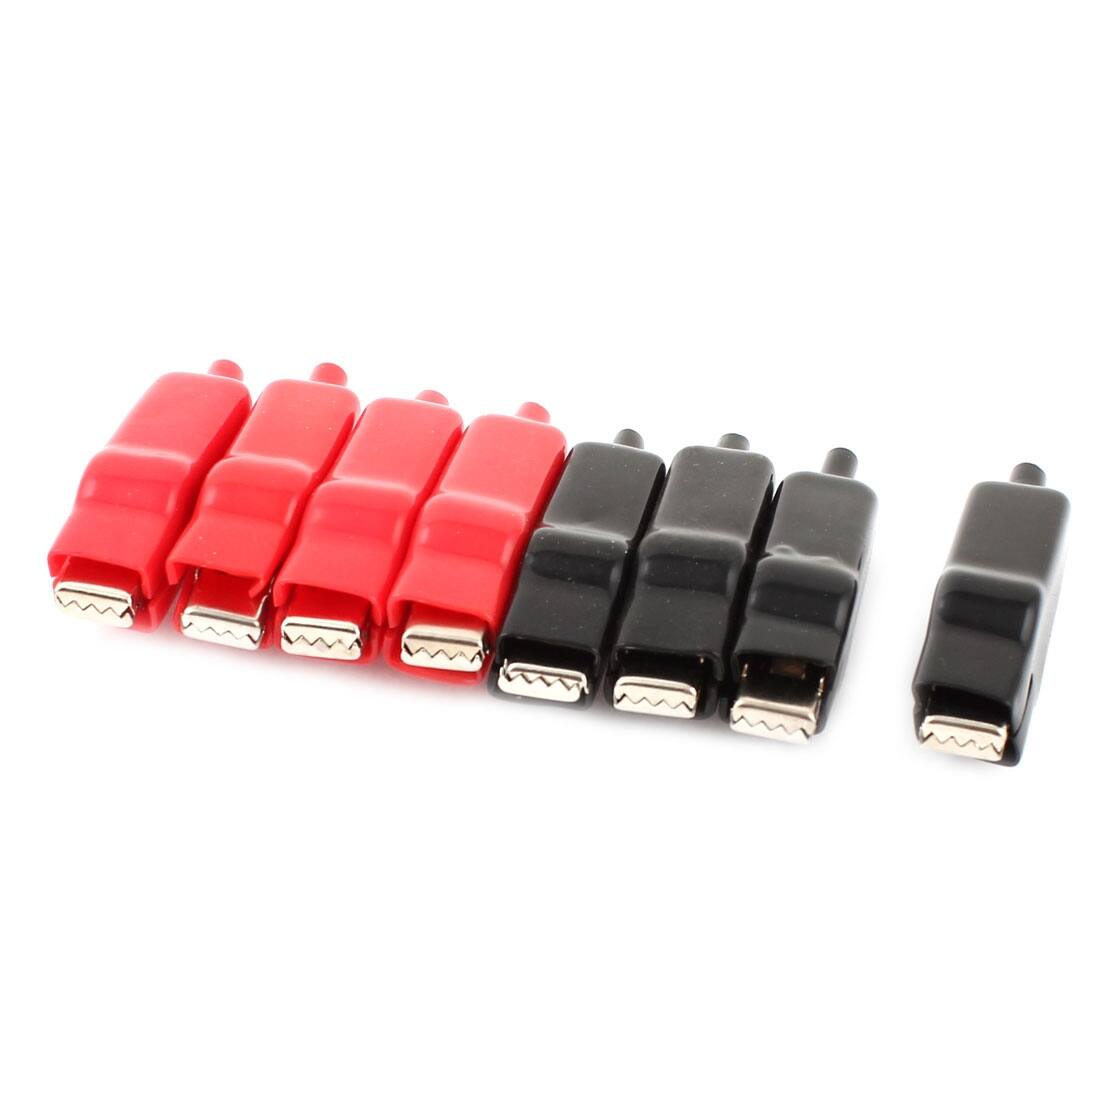 8PCS 78mm Length Electric Alligator Test Clip Clamp Red Black - Red, Silver Tone, Black